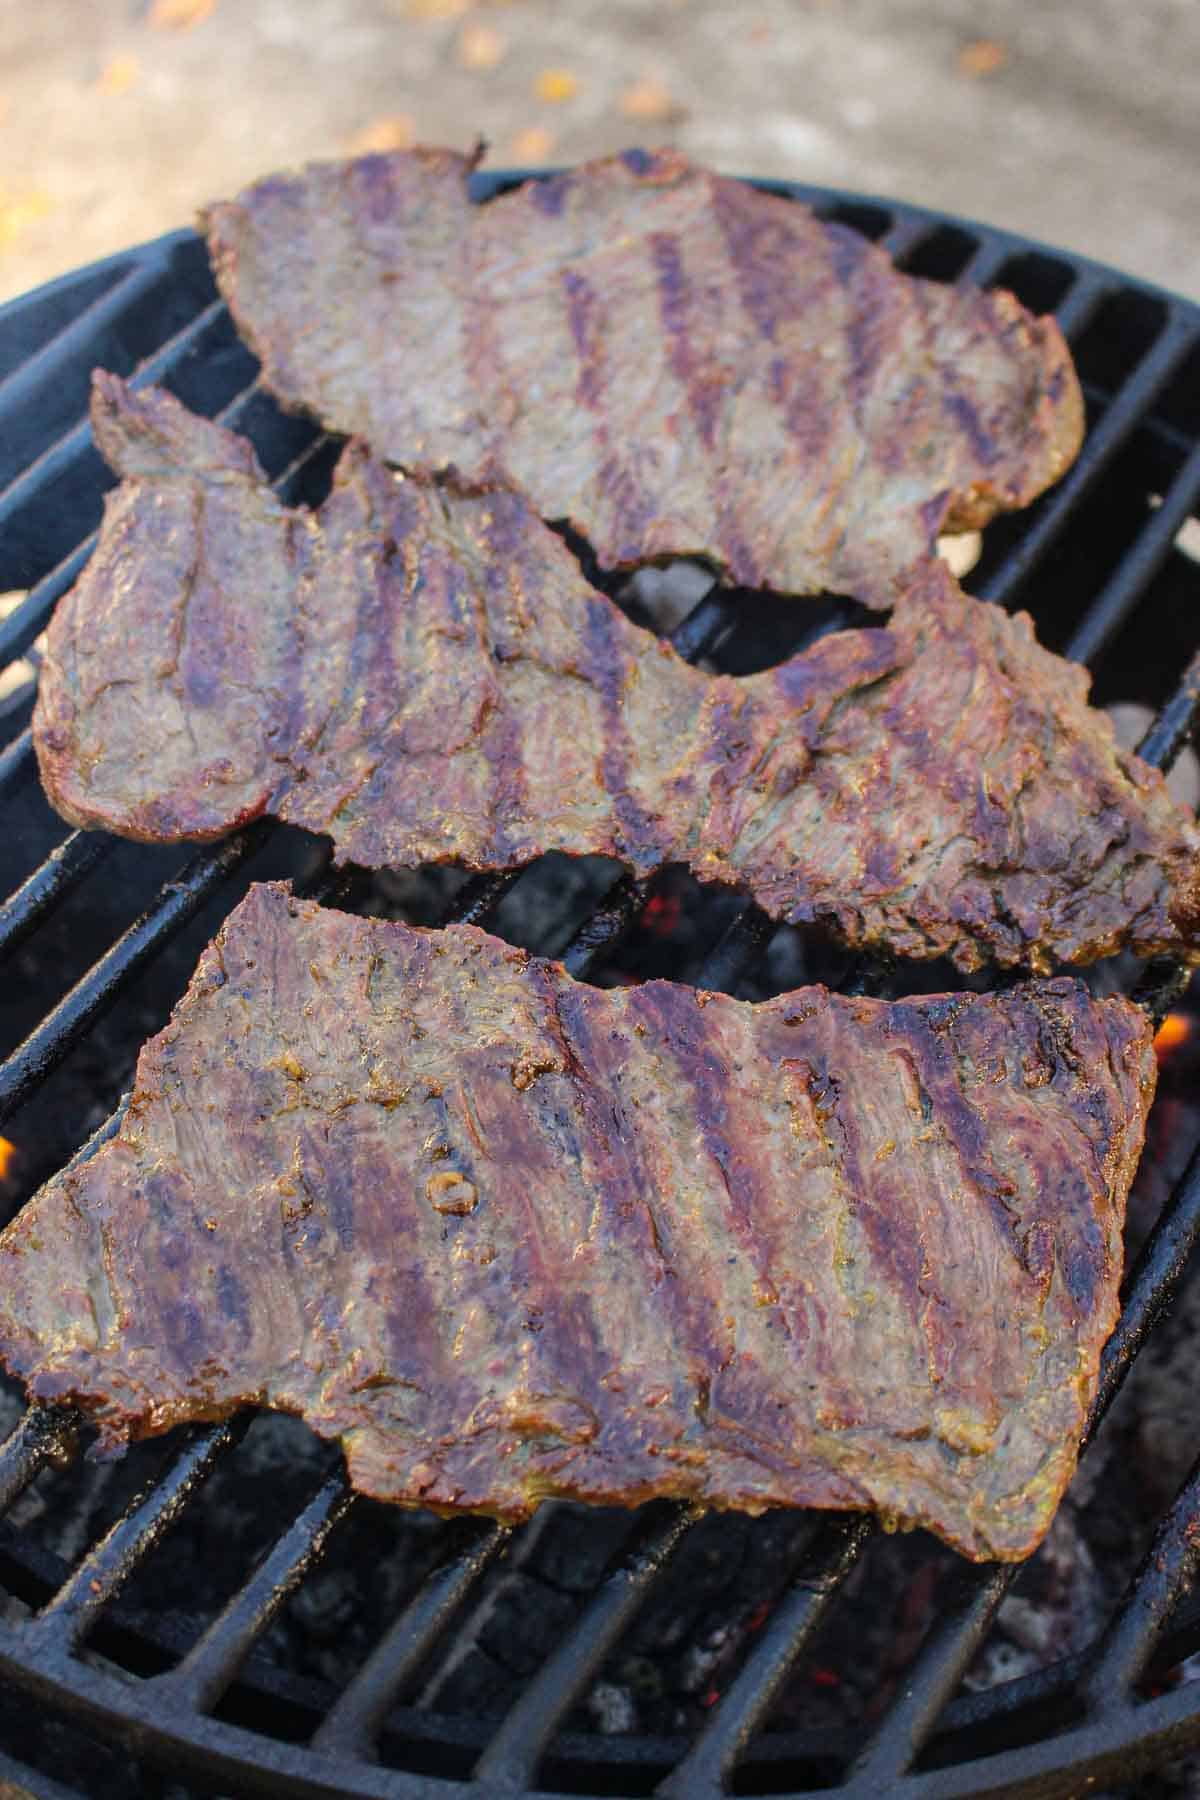 The grilled steak cooking on the grill.